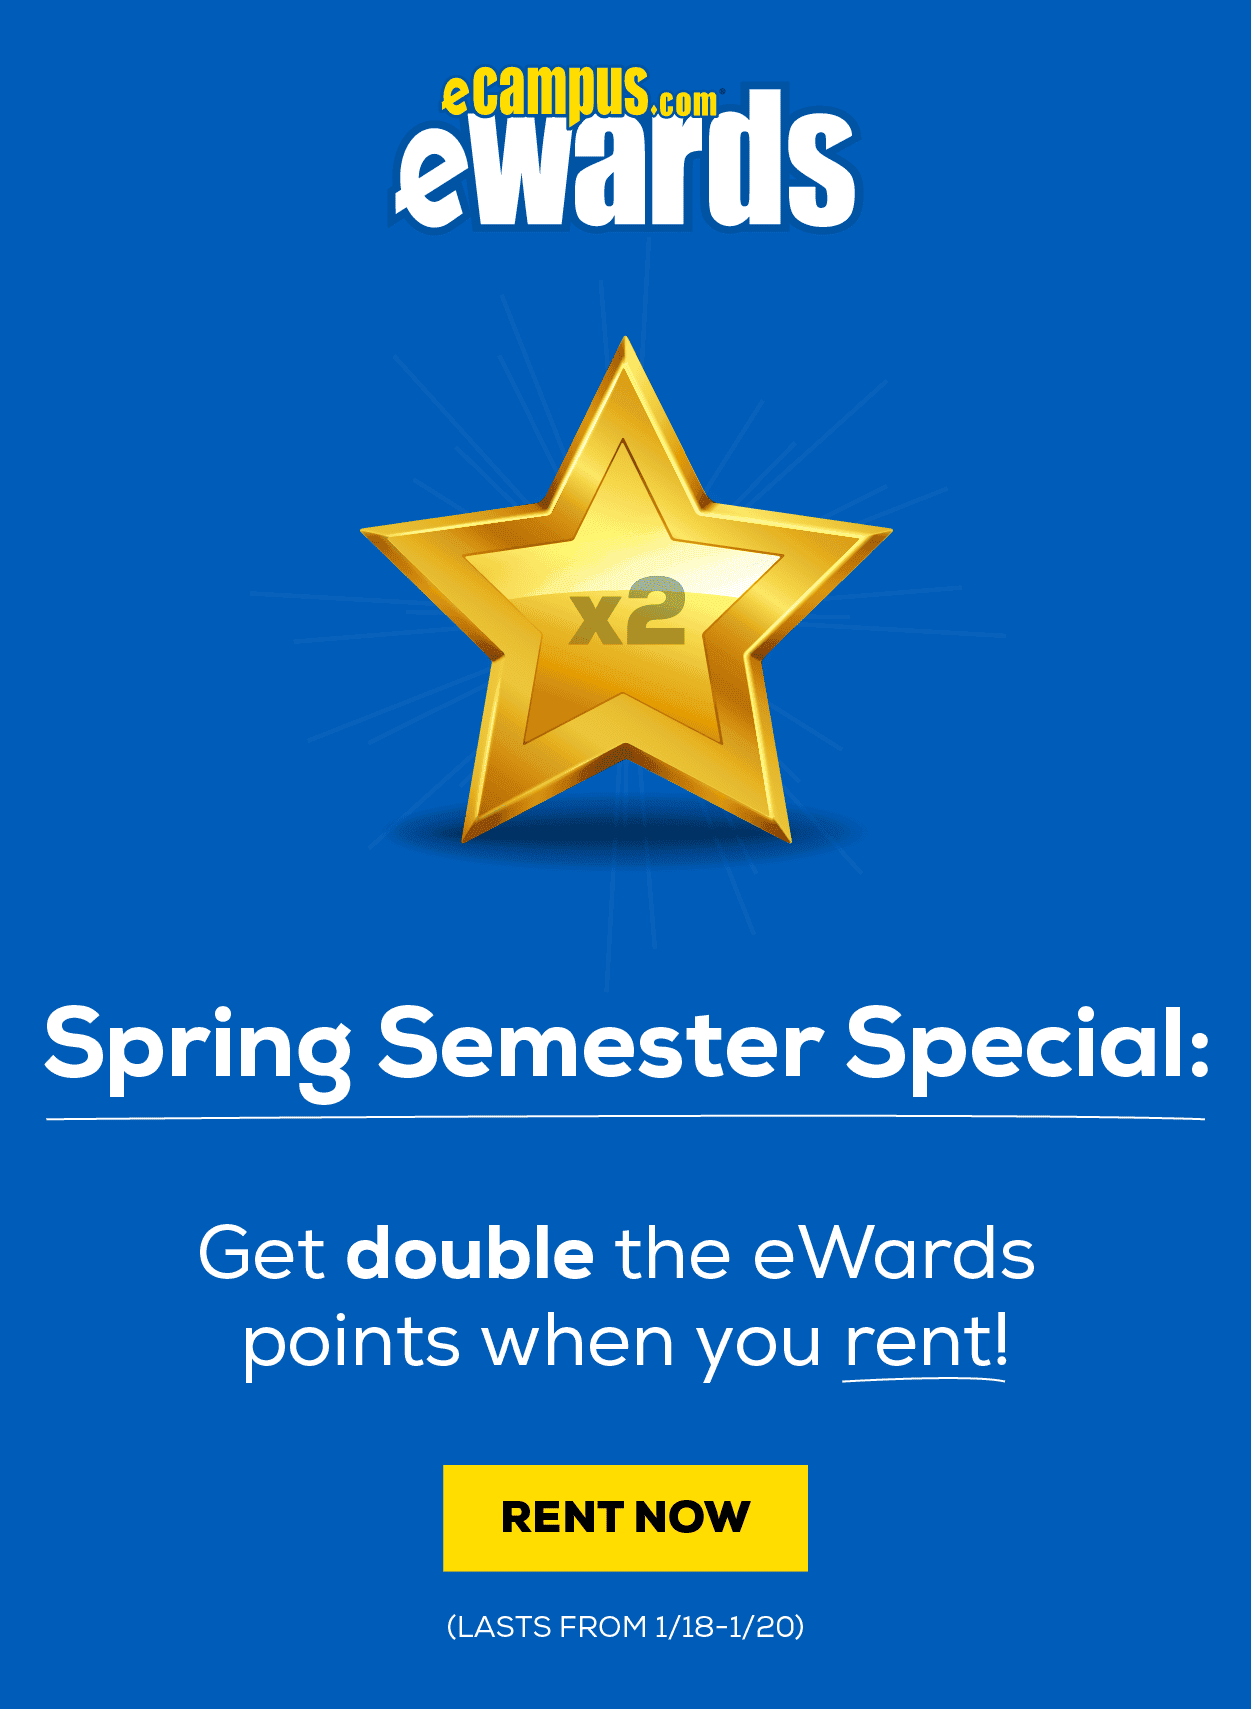 eCampus.com eWards | Spring Semester Special: Get double the eWards points when you rent! (Lasts From 1/18-1/20) | Solid blue background with a x2 gold star in the middle